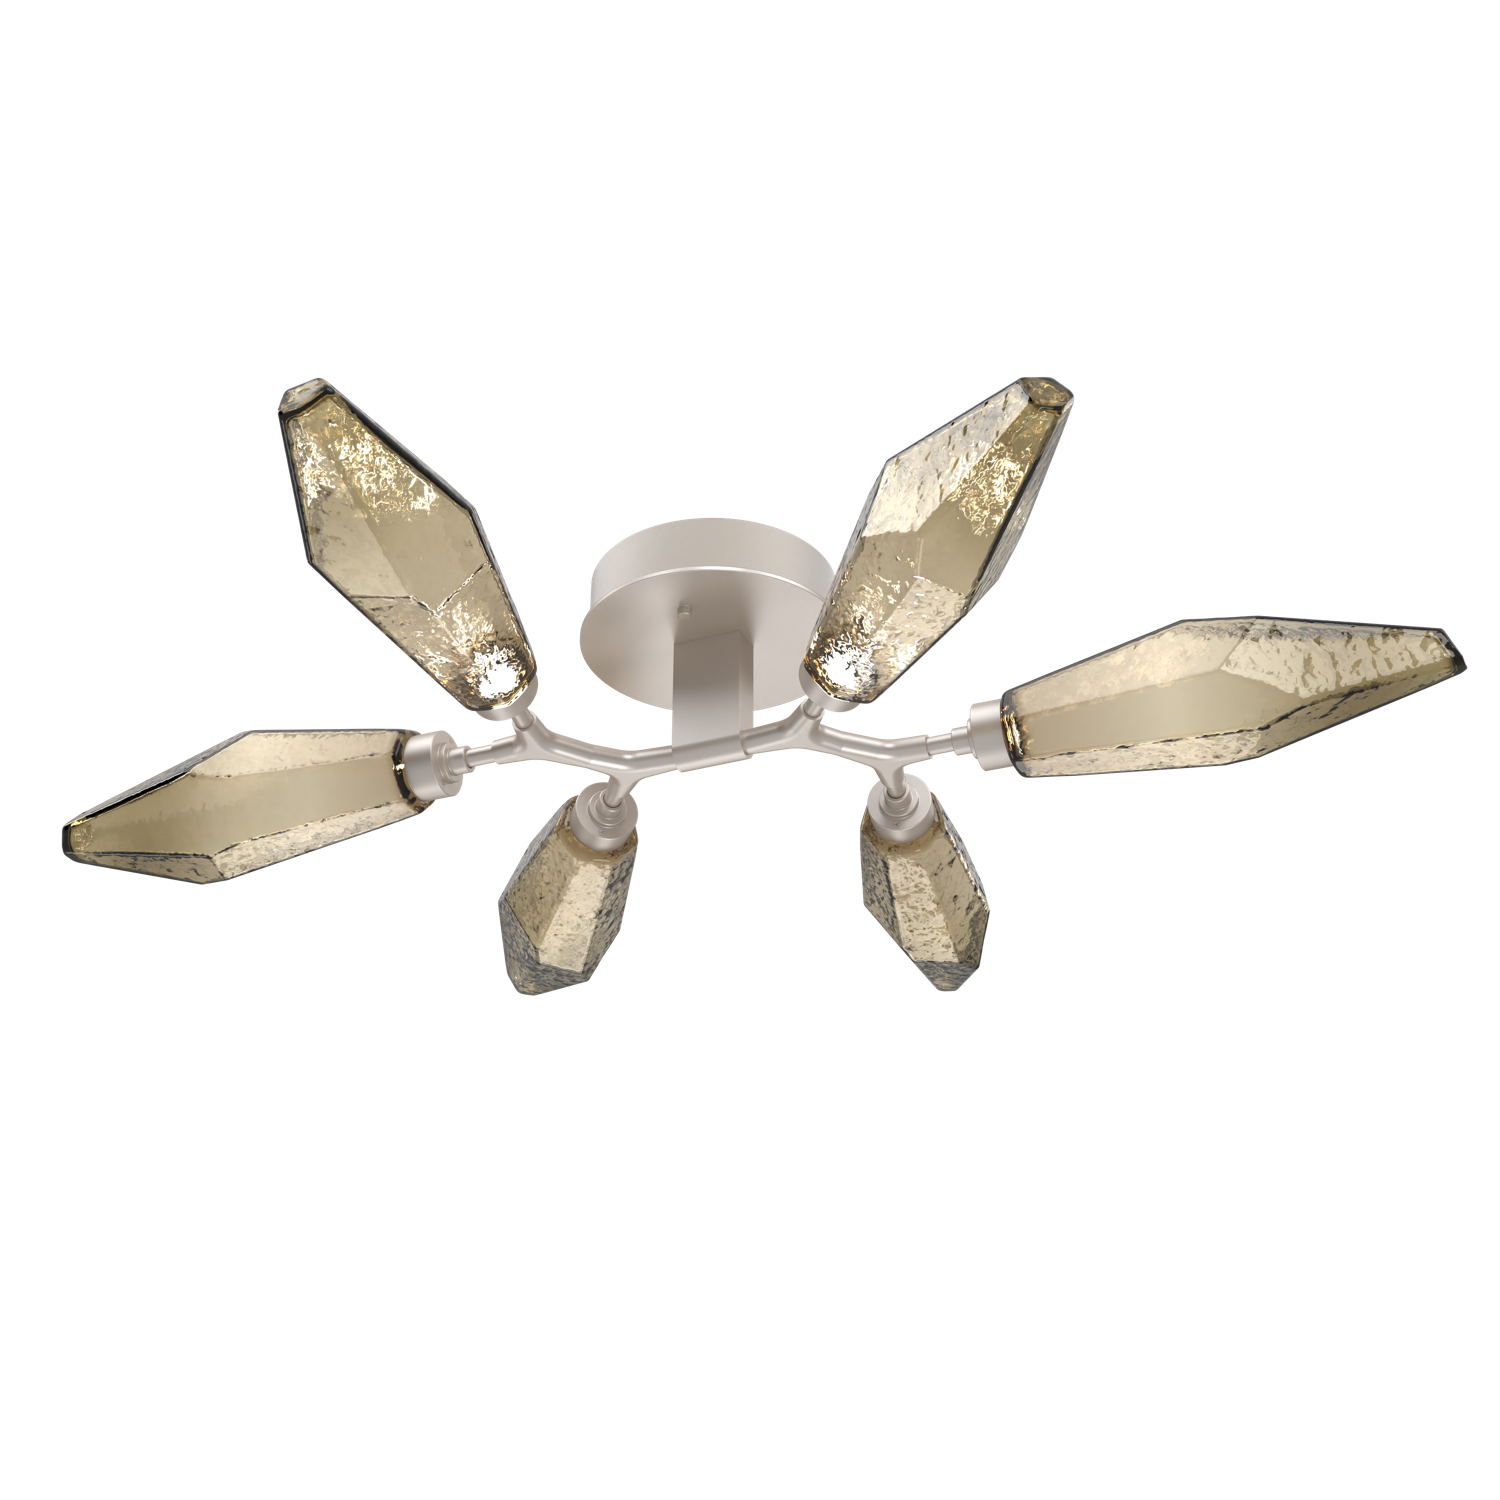 CLB0050-01-BS-CB-Hammerton-Studio-Rock-Crystal-flush-mount-light-with-beige-silver-finish-and-chilled-bronze-blown-glass-shades-and-LED-lamping